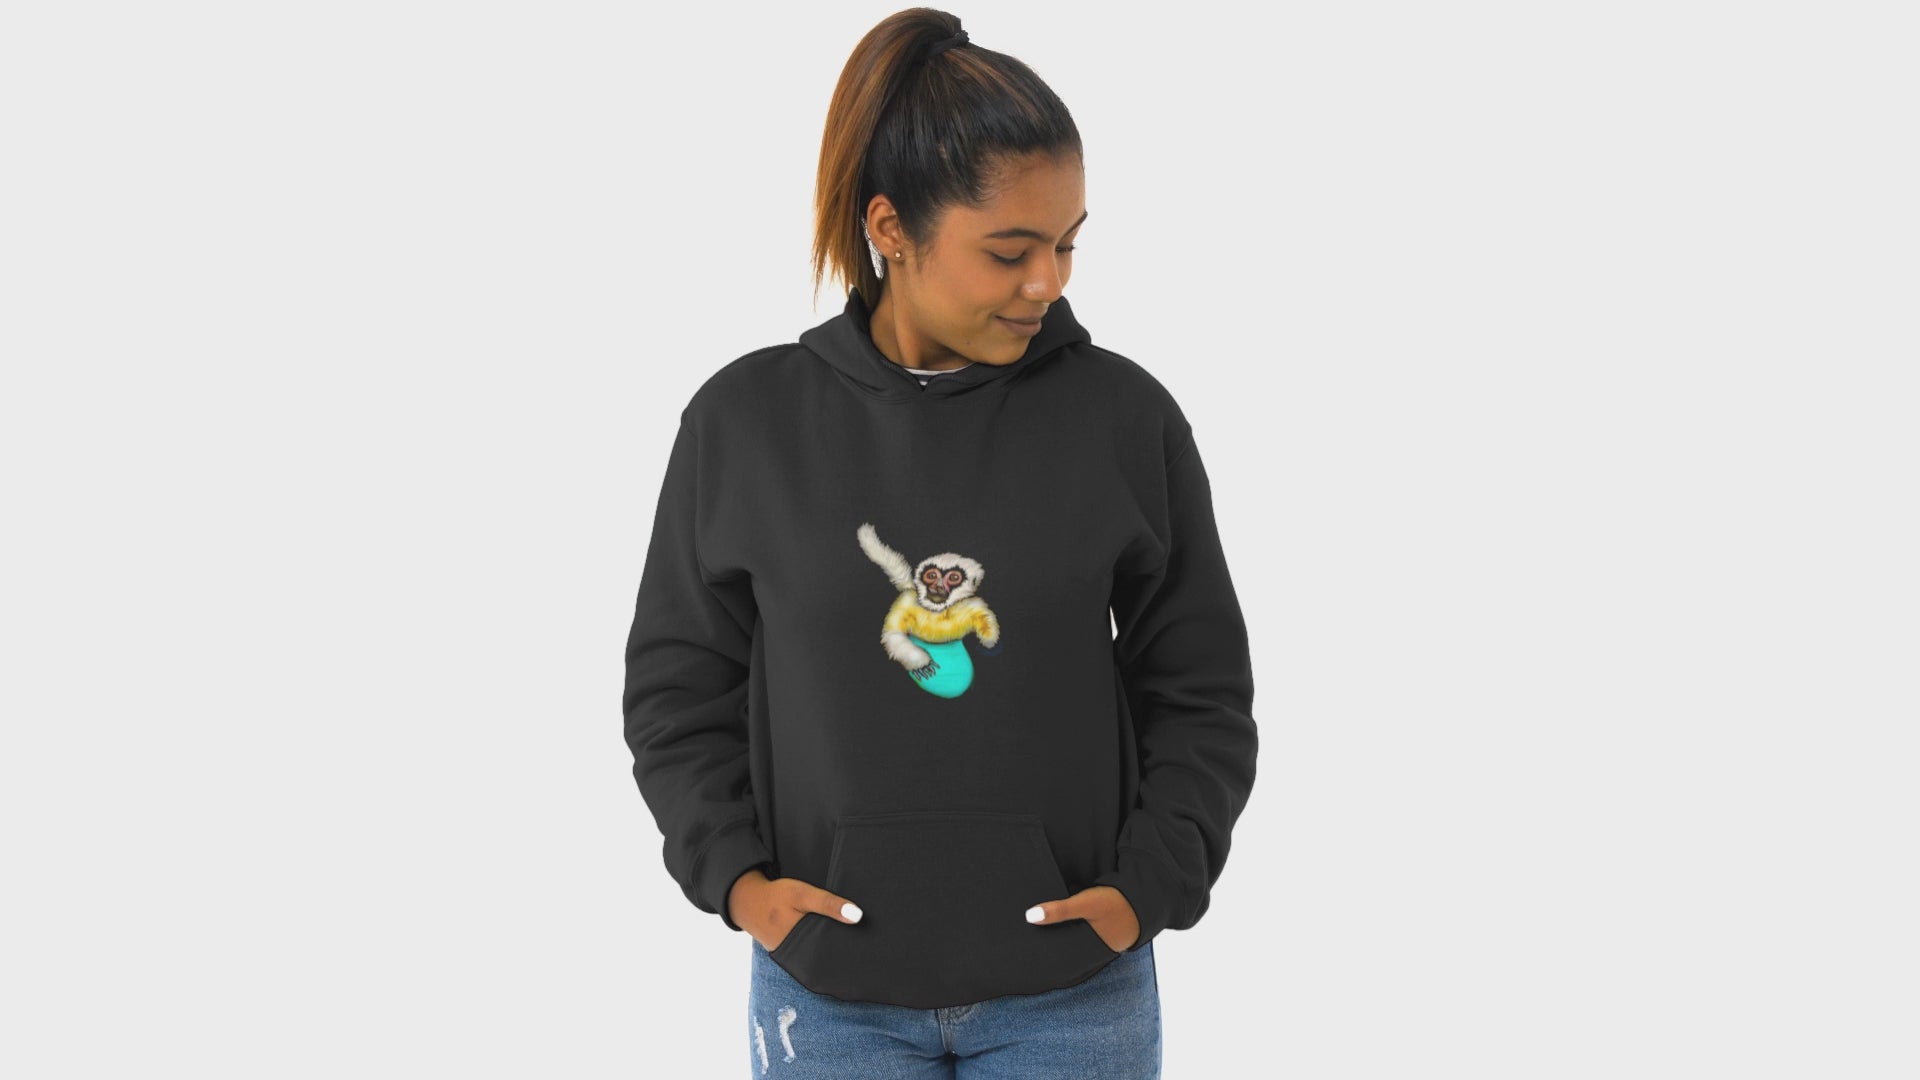 Surfing Gibbon | Sustainable Hoodie worn by a woman